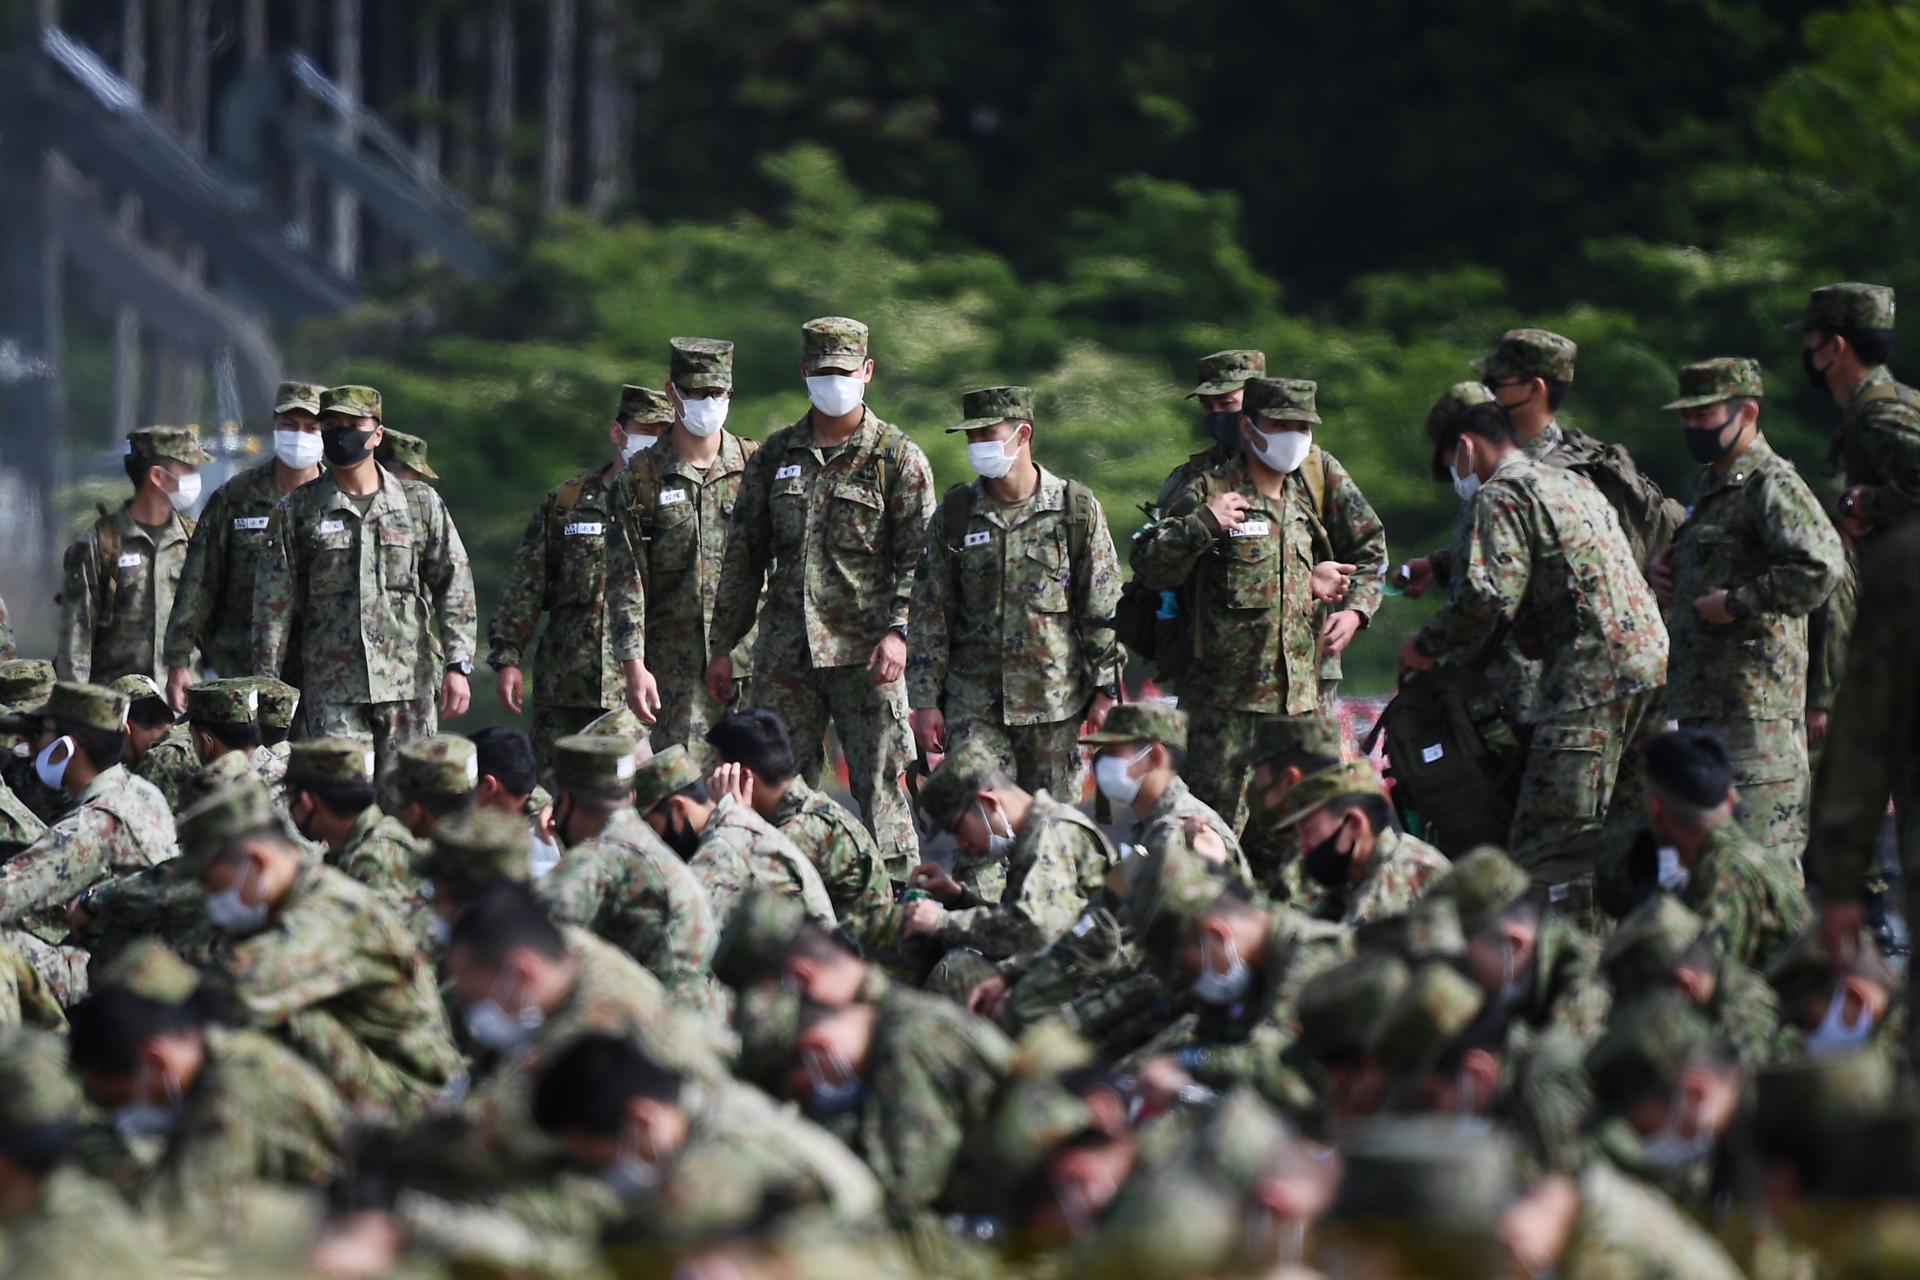 Troops in the Japanese self-defense army attend the Japan Ground Self-Defense Forces' annual live fire exercise at the Higashi-Fuji firing range in Gotembazz, Shizuoka prefecture, Japan, 23 May 2020. EFE-EPA/CHARLY TRIBALLEAU / POOL/FILE